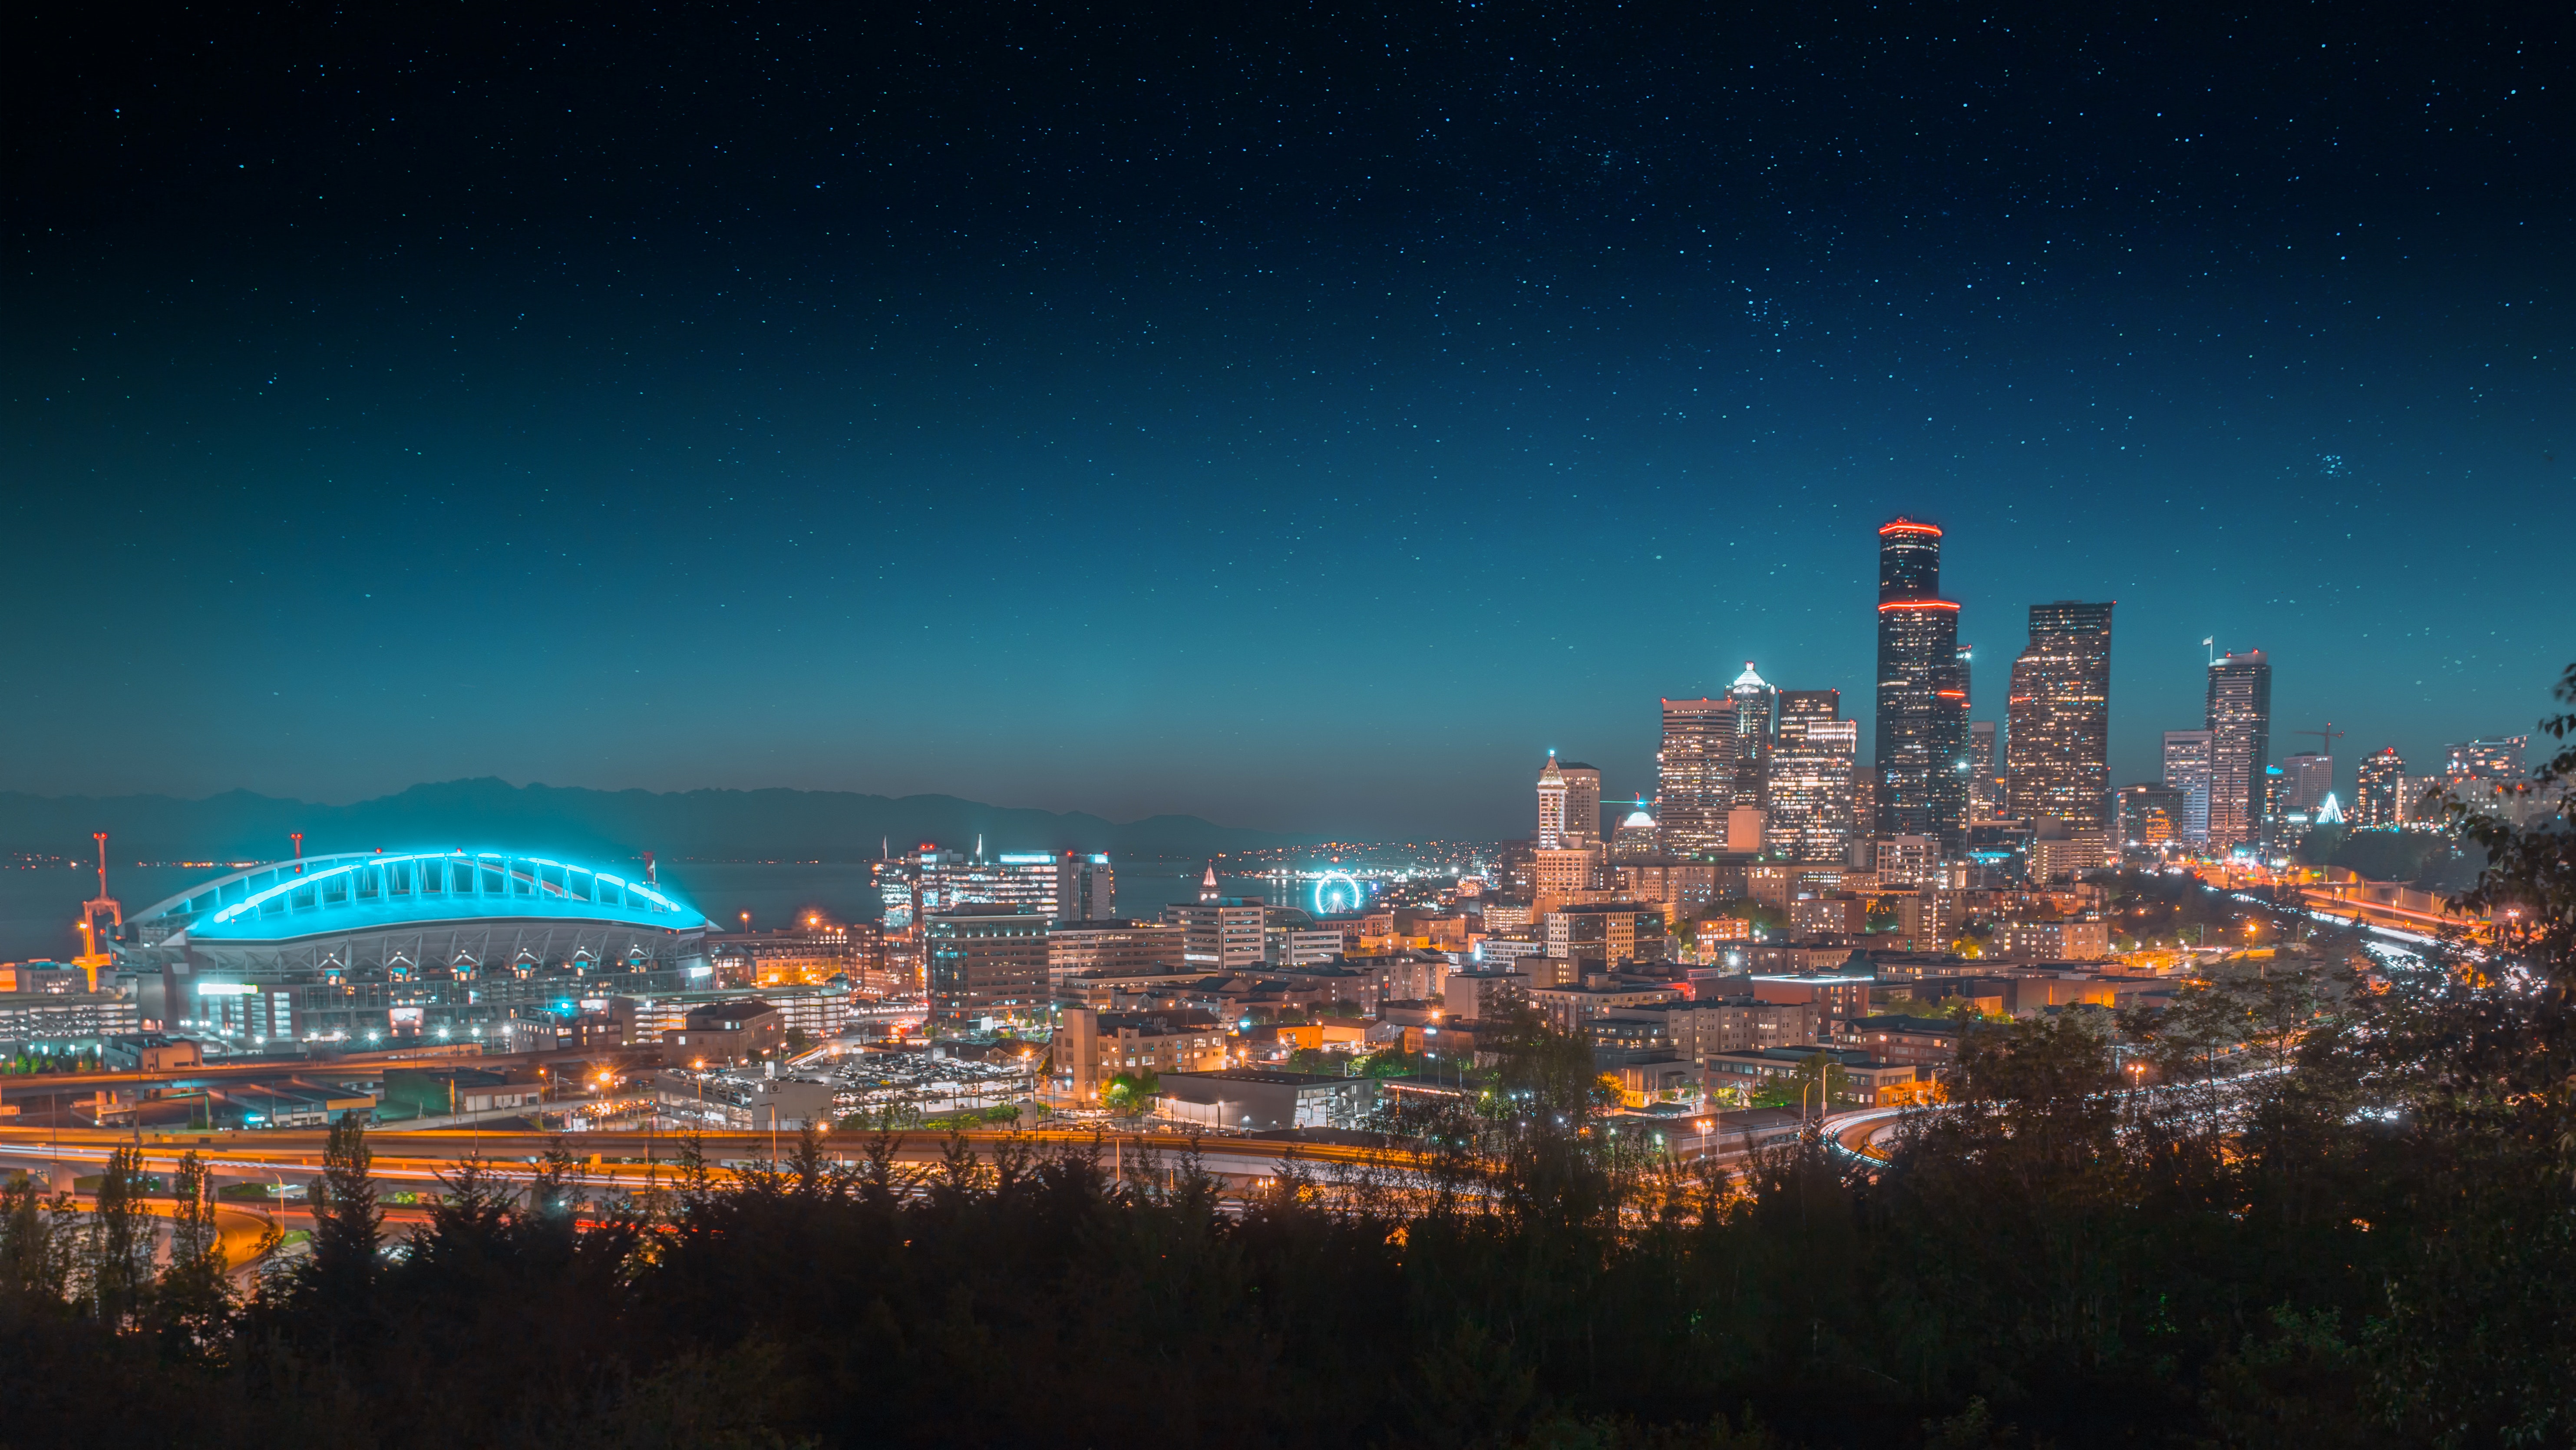 Cool Wallpapers cities, architecture, starry sky, night city, city lights, panorama